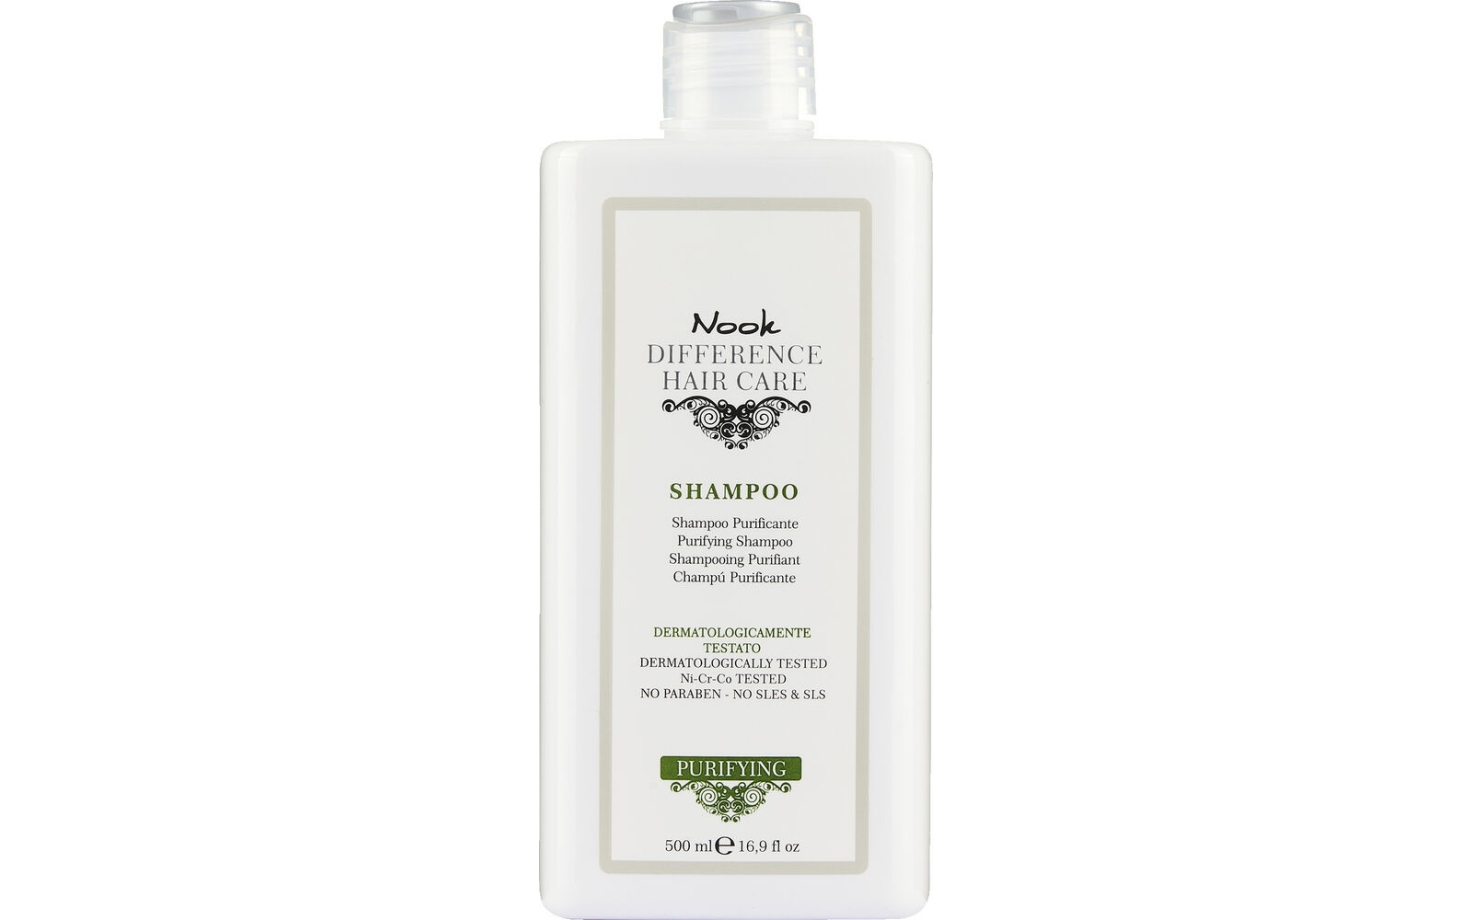 Nook Difference Hair Purifying Shampoo